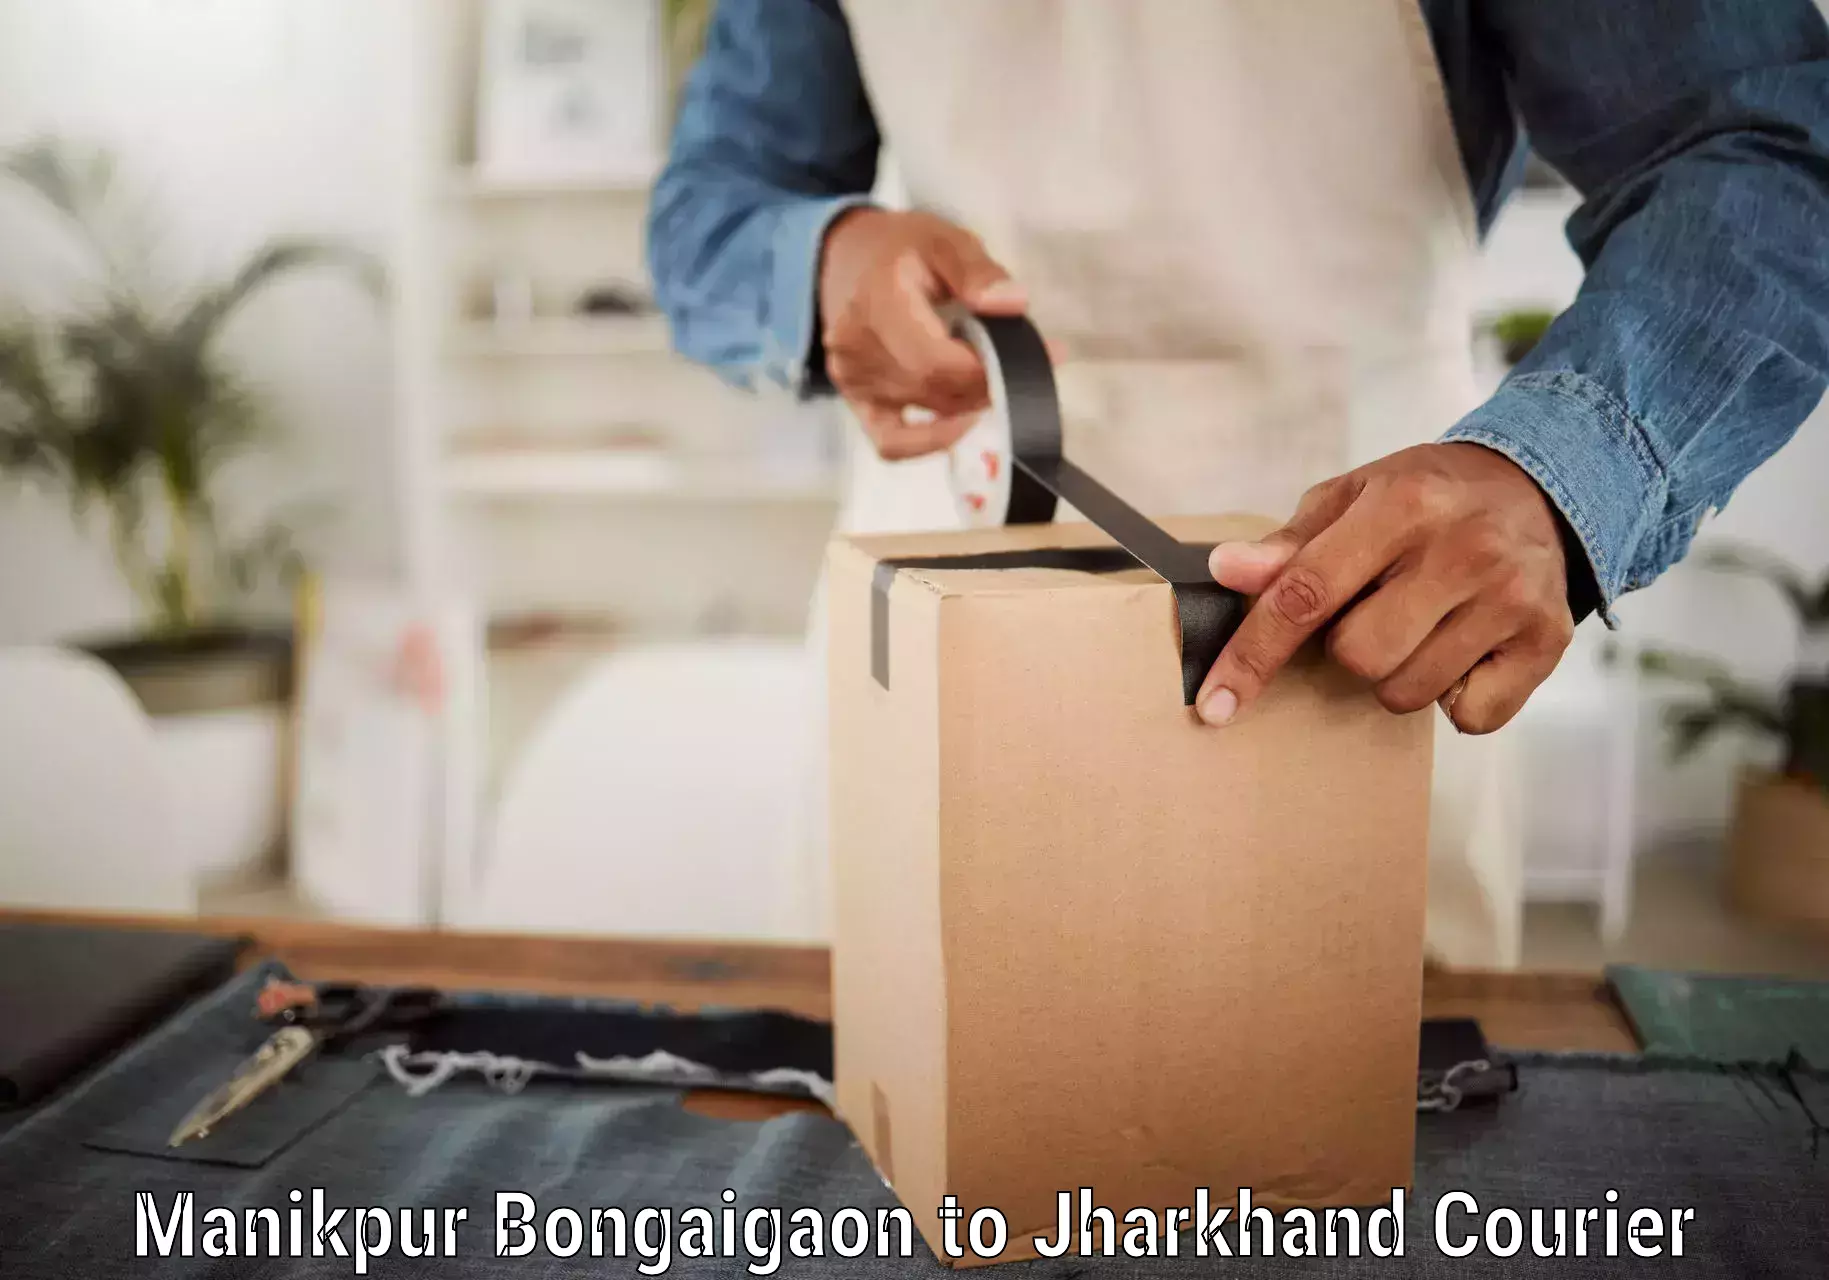 Round-the-clock parcel delivery Manikpur Bongaigaon to Jharkhand